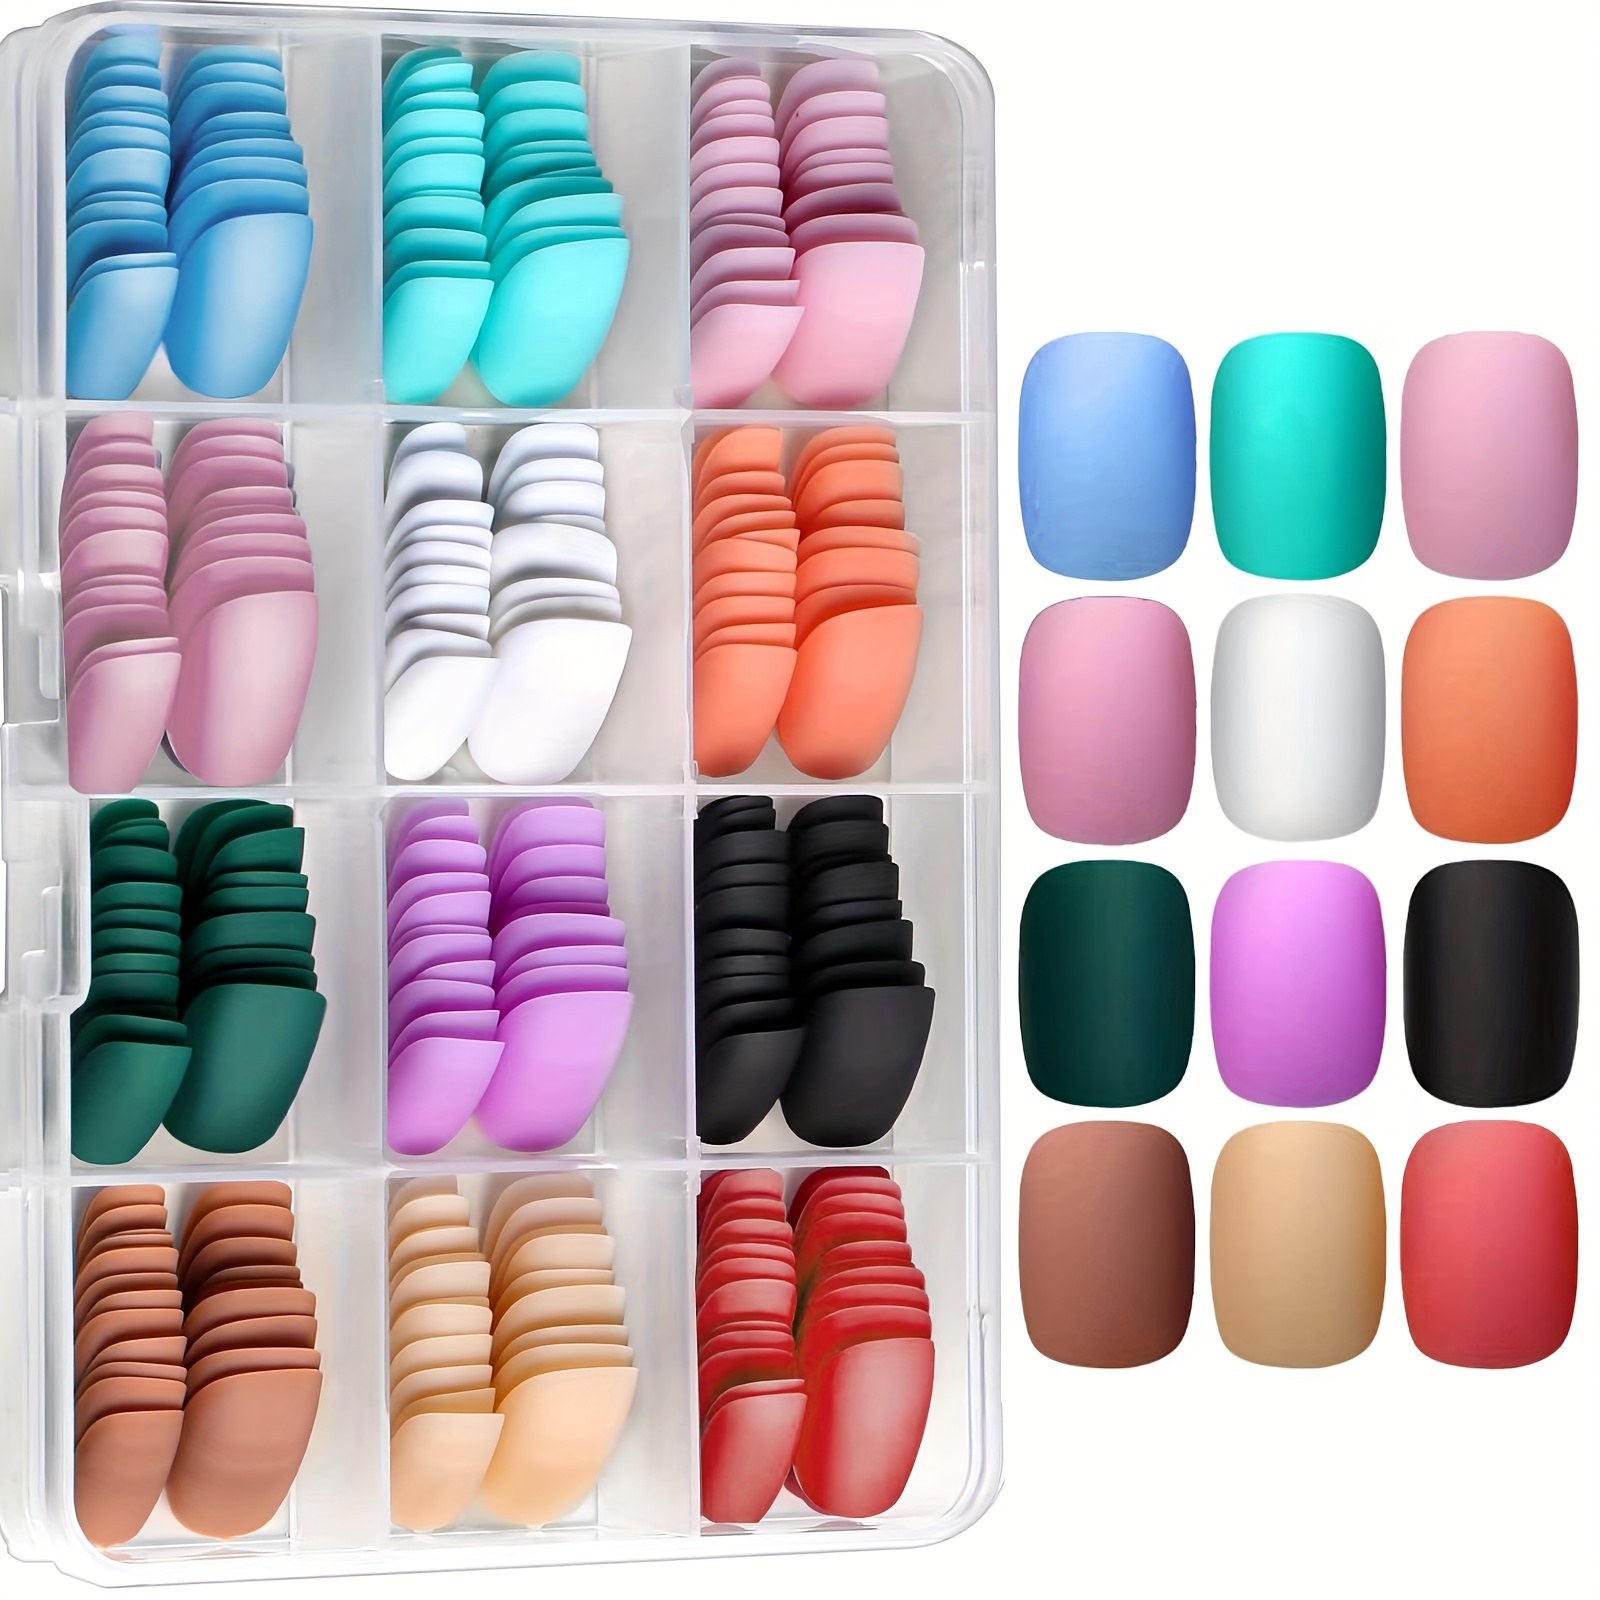 

288pcs Matte Pure Color Press On Nails - Full Cover Frosted False Nails For Women, Girls, And Teens - Short Oval Design - Easy To Apply And Remove - Long-lasting And Durable